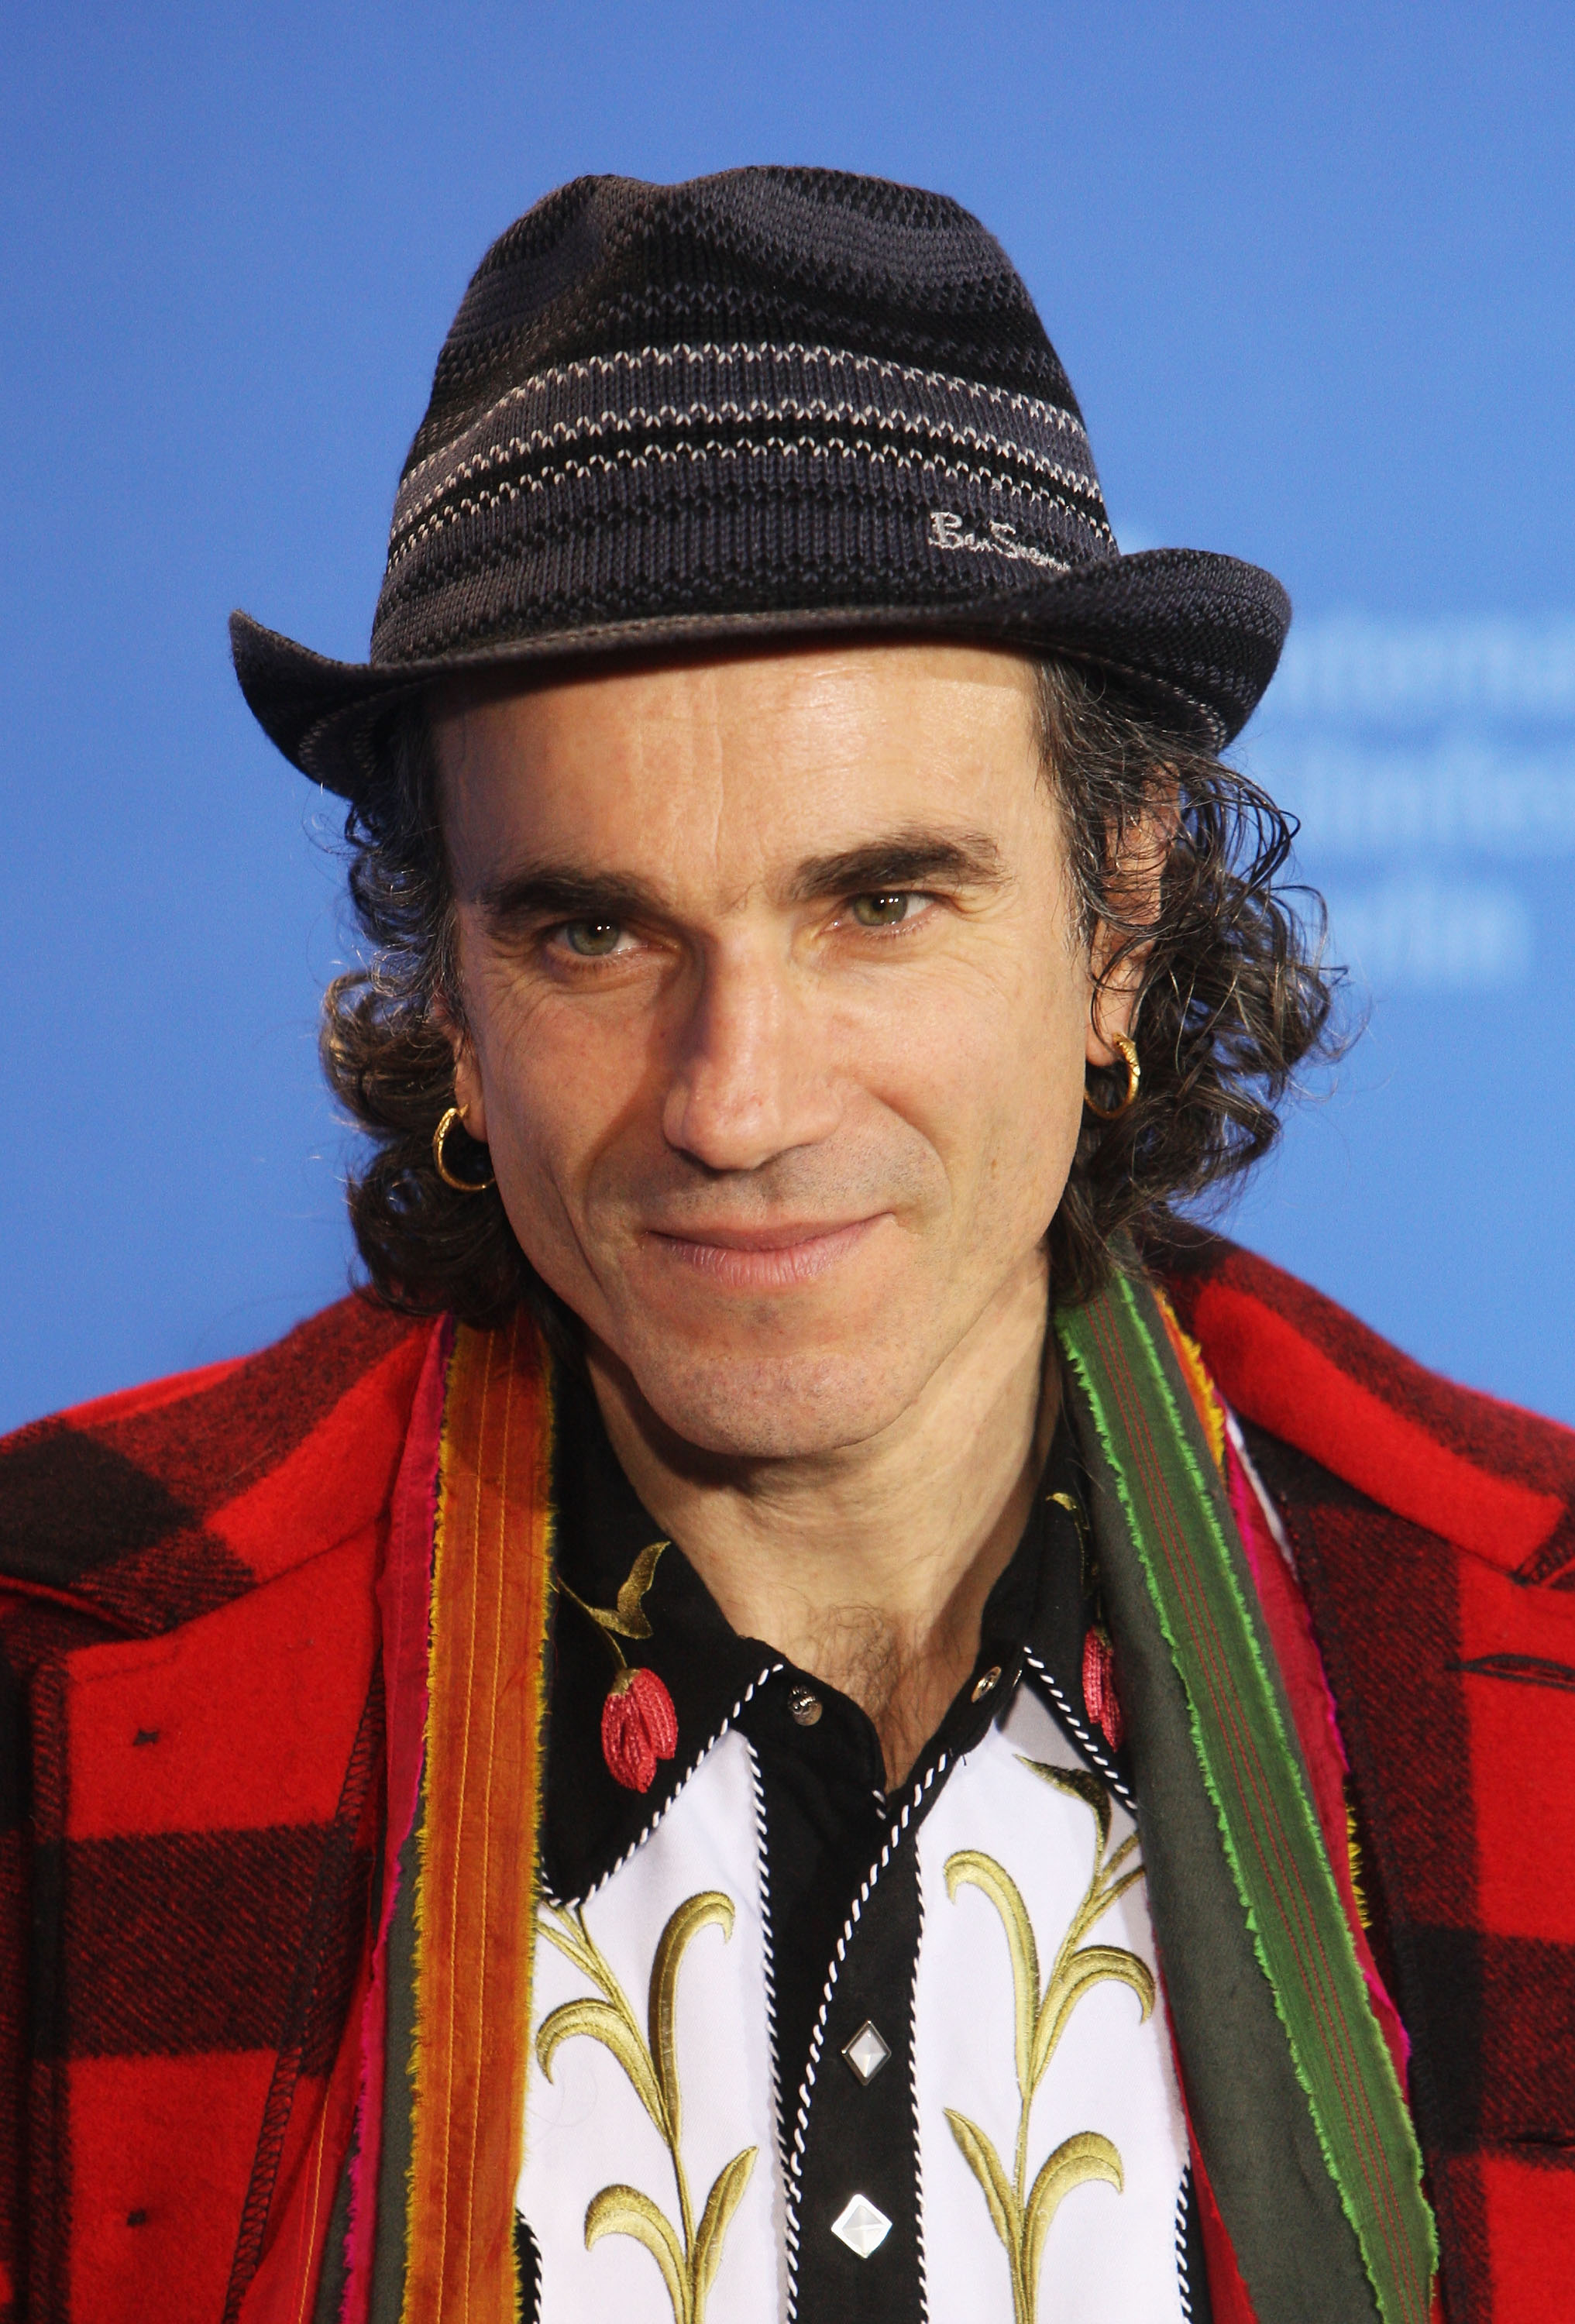 Daniel Day-Lewis at the 58th Berlinale Film Festival on February 8, 2008 in Berlin, Germany. | Source: Getty Images